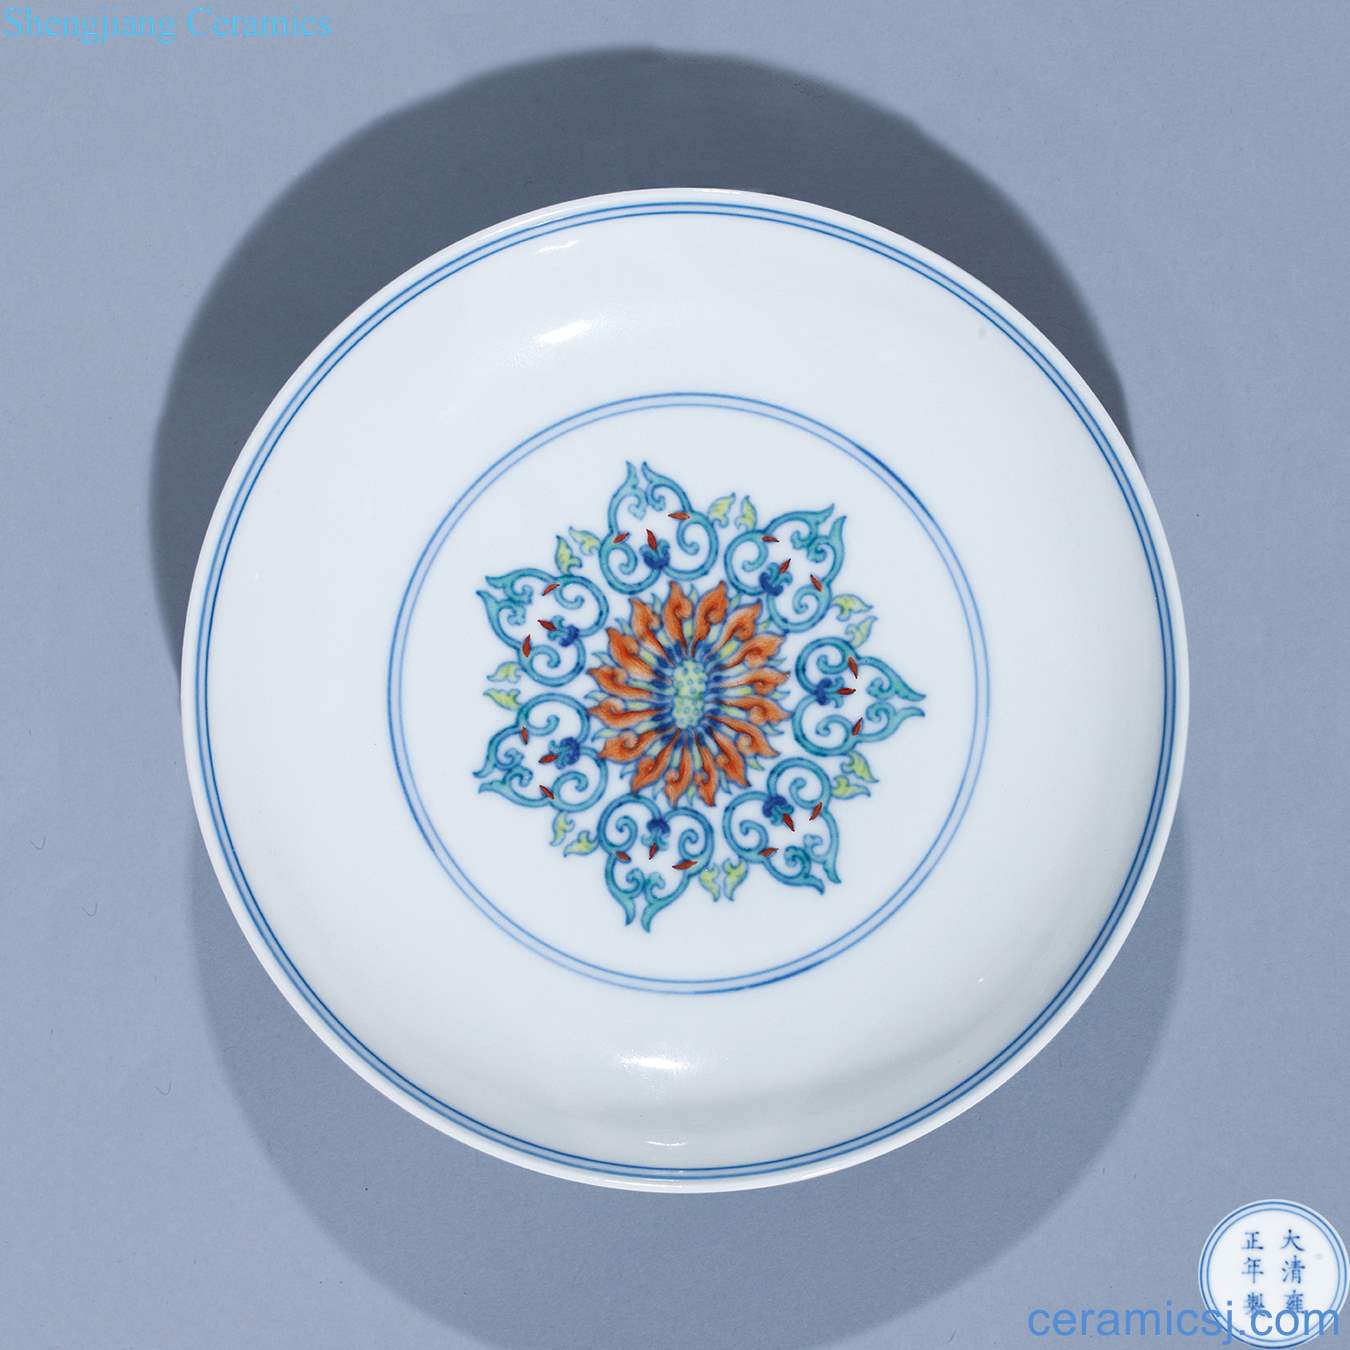 Qing bucket color decorative pattern plate